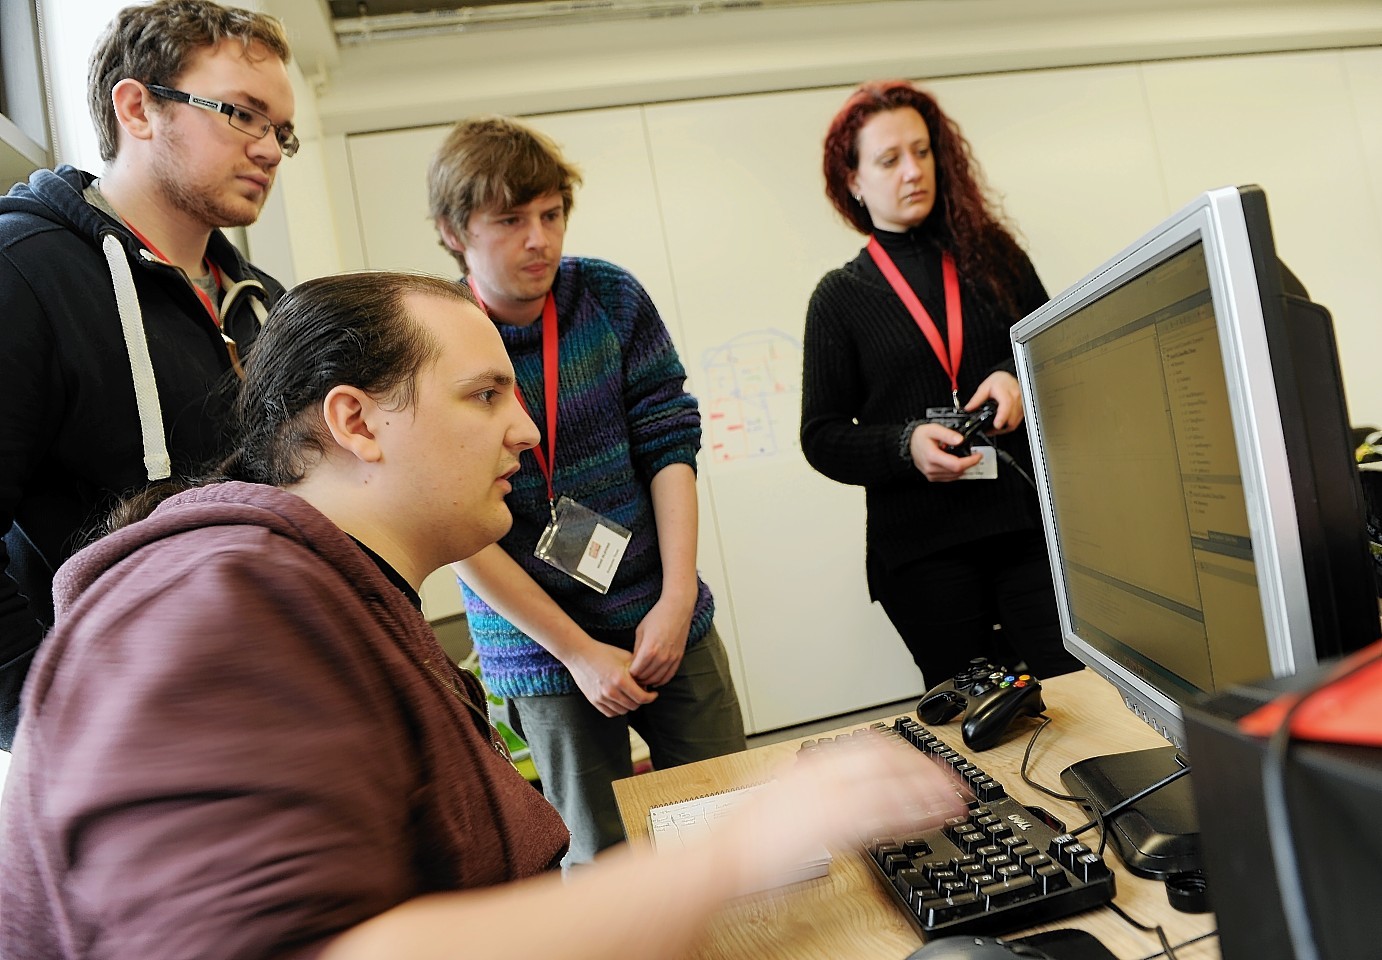 Budding computer game designers will have the chance to receive expert mentoring from Elgin-based Hunted Cow Studios should their idea win